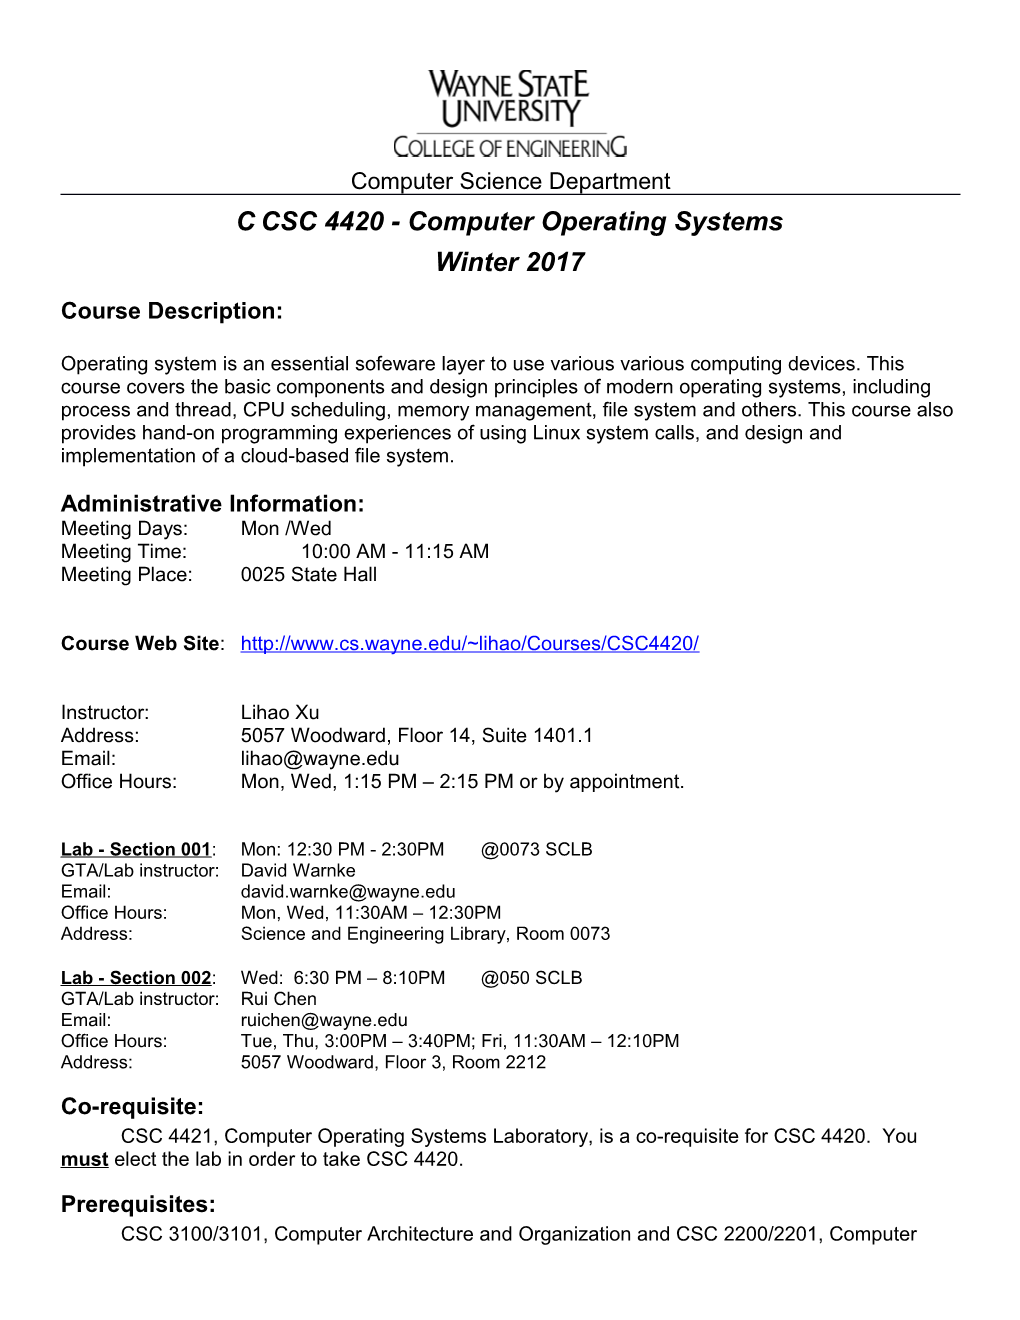 CCSC 4420 - Computer Operating Systems